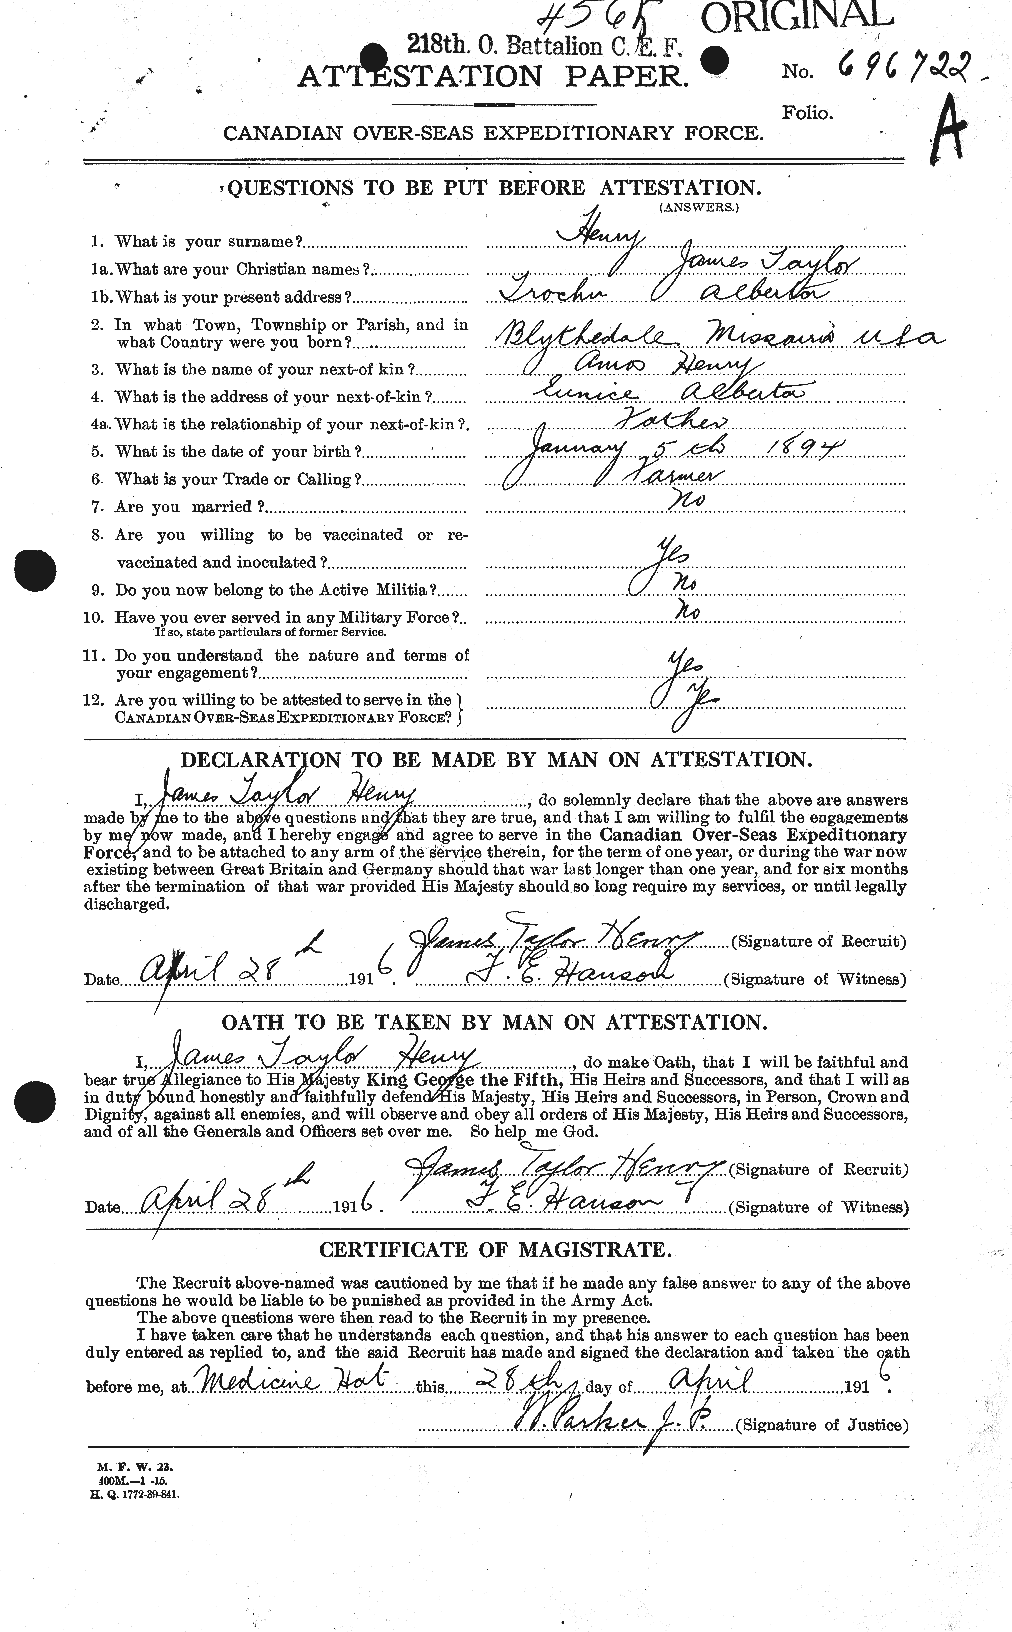 Personnel Records of the First World War - CEF 387600a